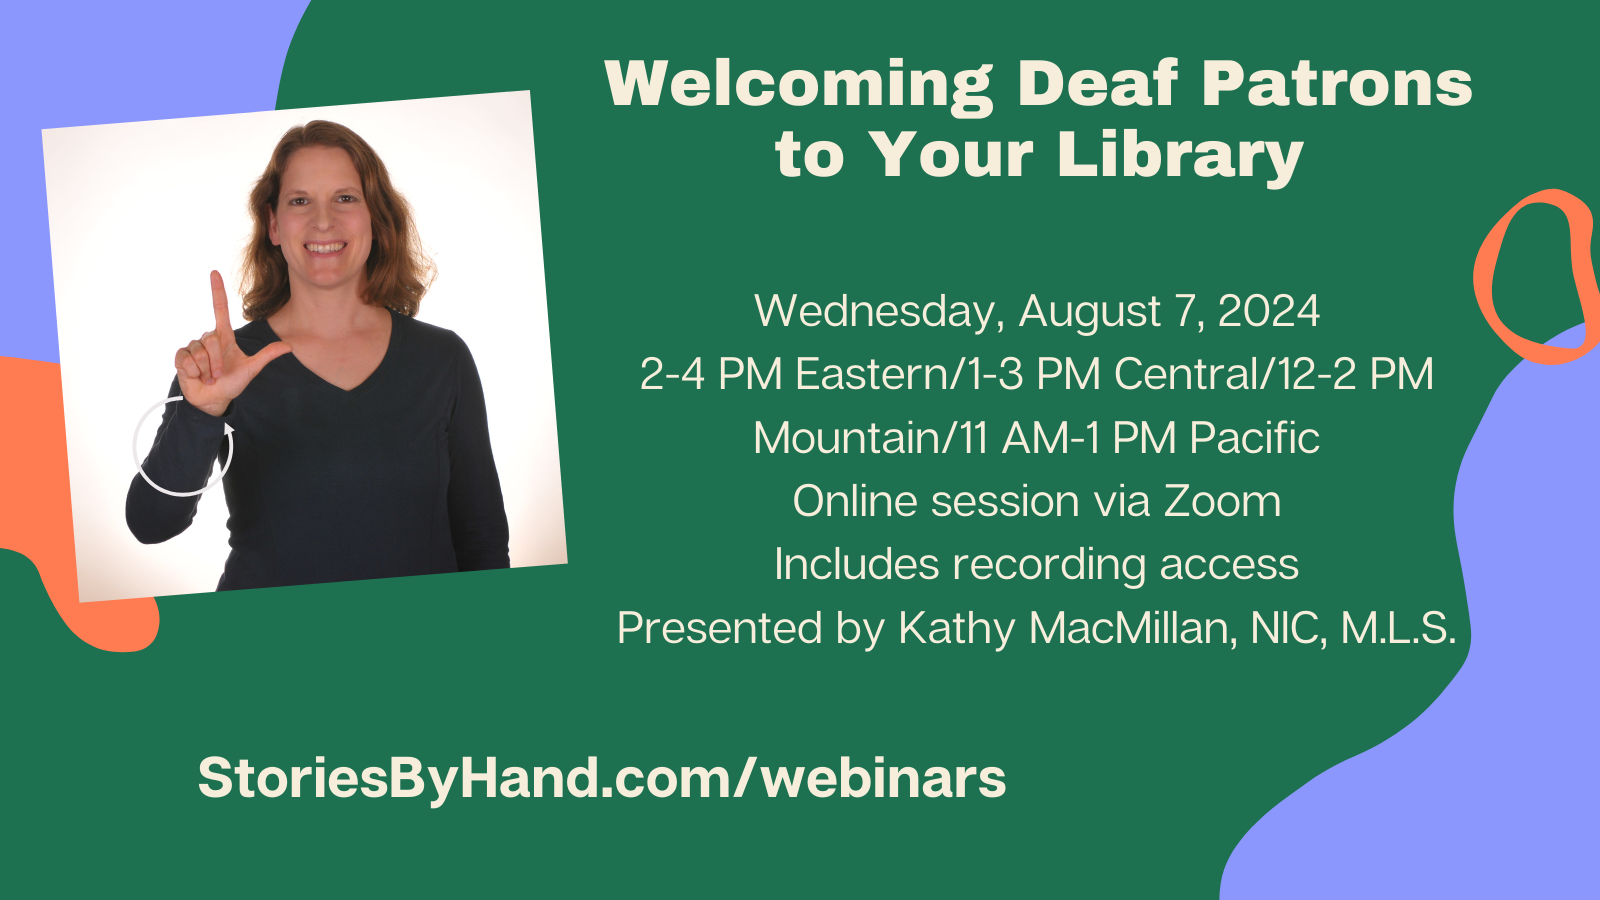 On the left, a White woman with brown hair signs LIBRARY in American Sign Language. Text reads: Welcoming Deaf Patrons to Your Library Wednesday, August 7, 2024. 2-4 PM Eastern/1-3 PM Central/12-2 PM Mountain/11 AM-1 PM Pacific. Online session via Zoom (2-hour webinar). Includes recording access. Presented by Kathy MacMillan, NIC, M.L.S. StoriesByHand.com/webinars 